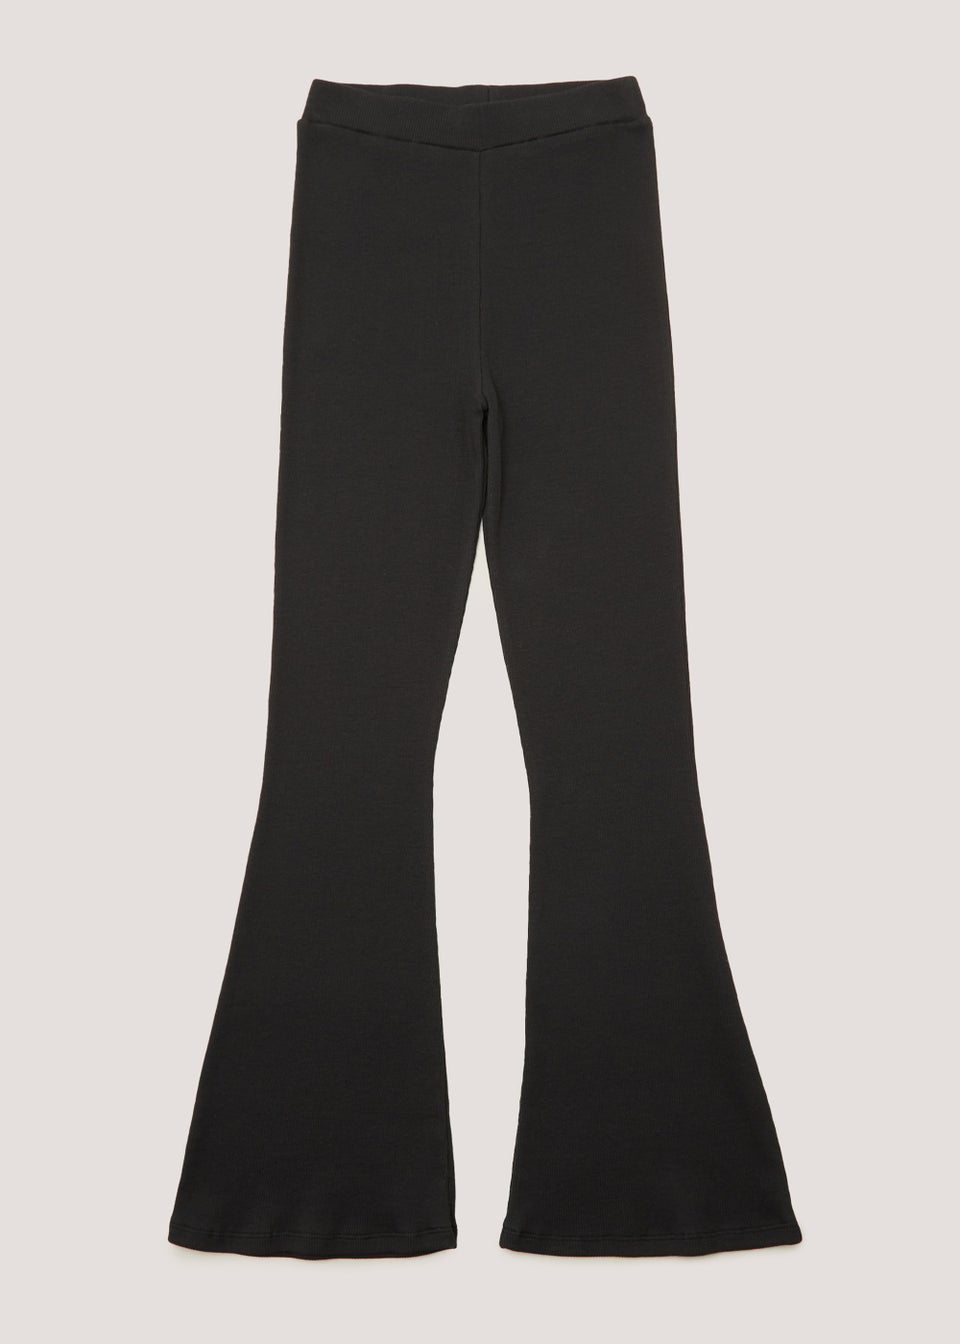 Girls Candy Couture Black Ribbed Flared Leggings (9-16yrs)